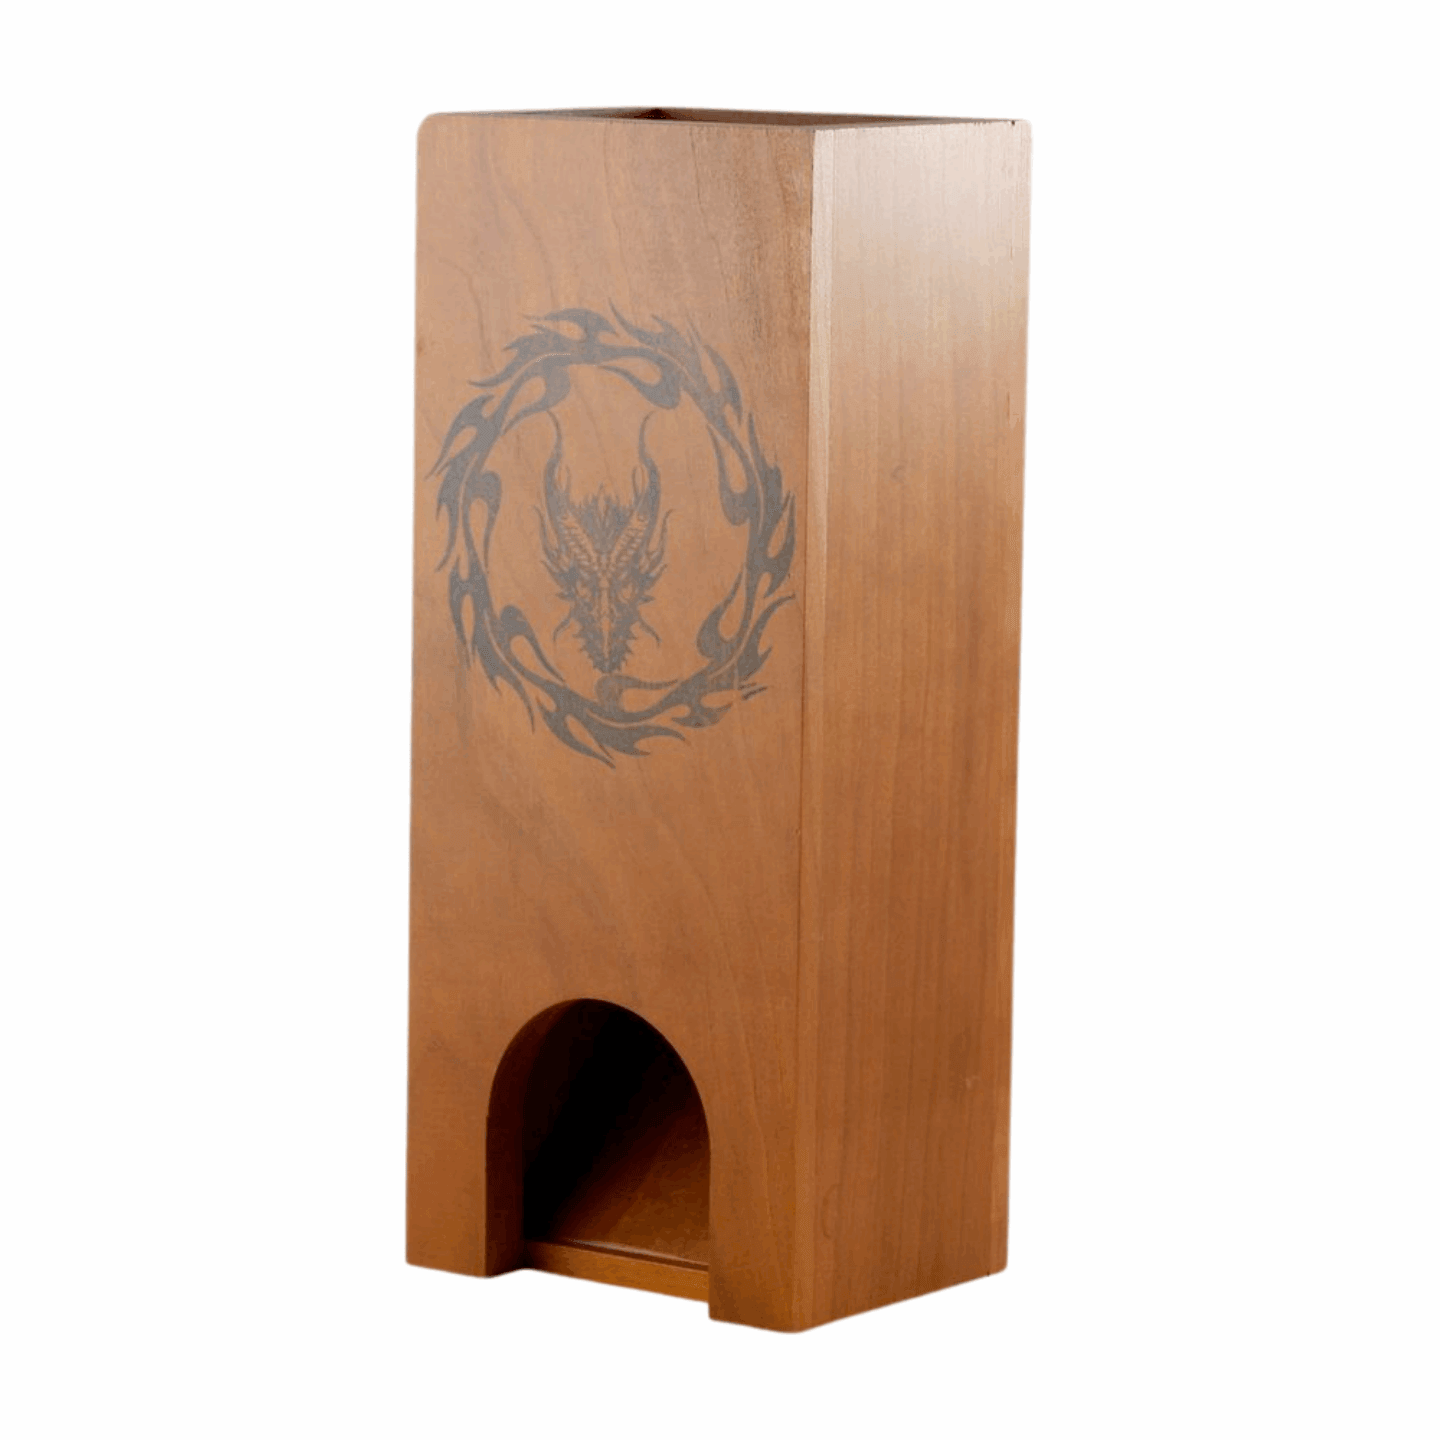 Cherry Dice Tower with Dragon Encircled in Flames - Dragon Armor Games